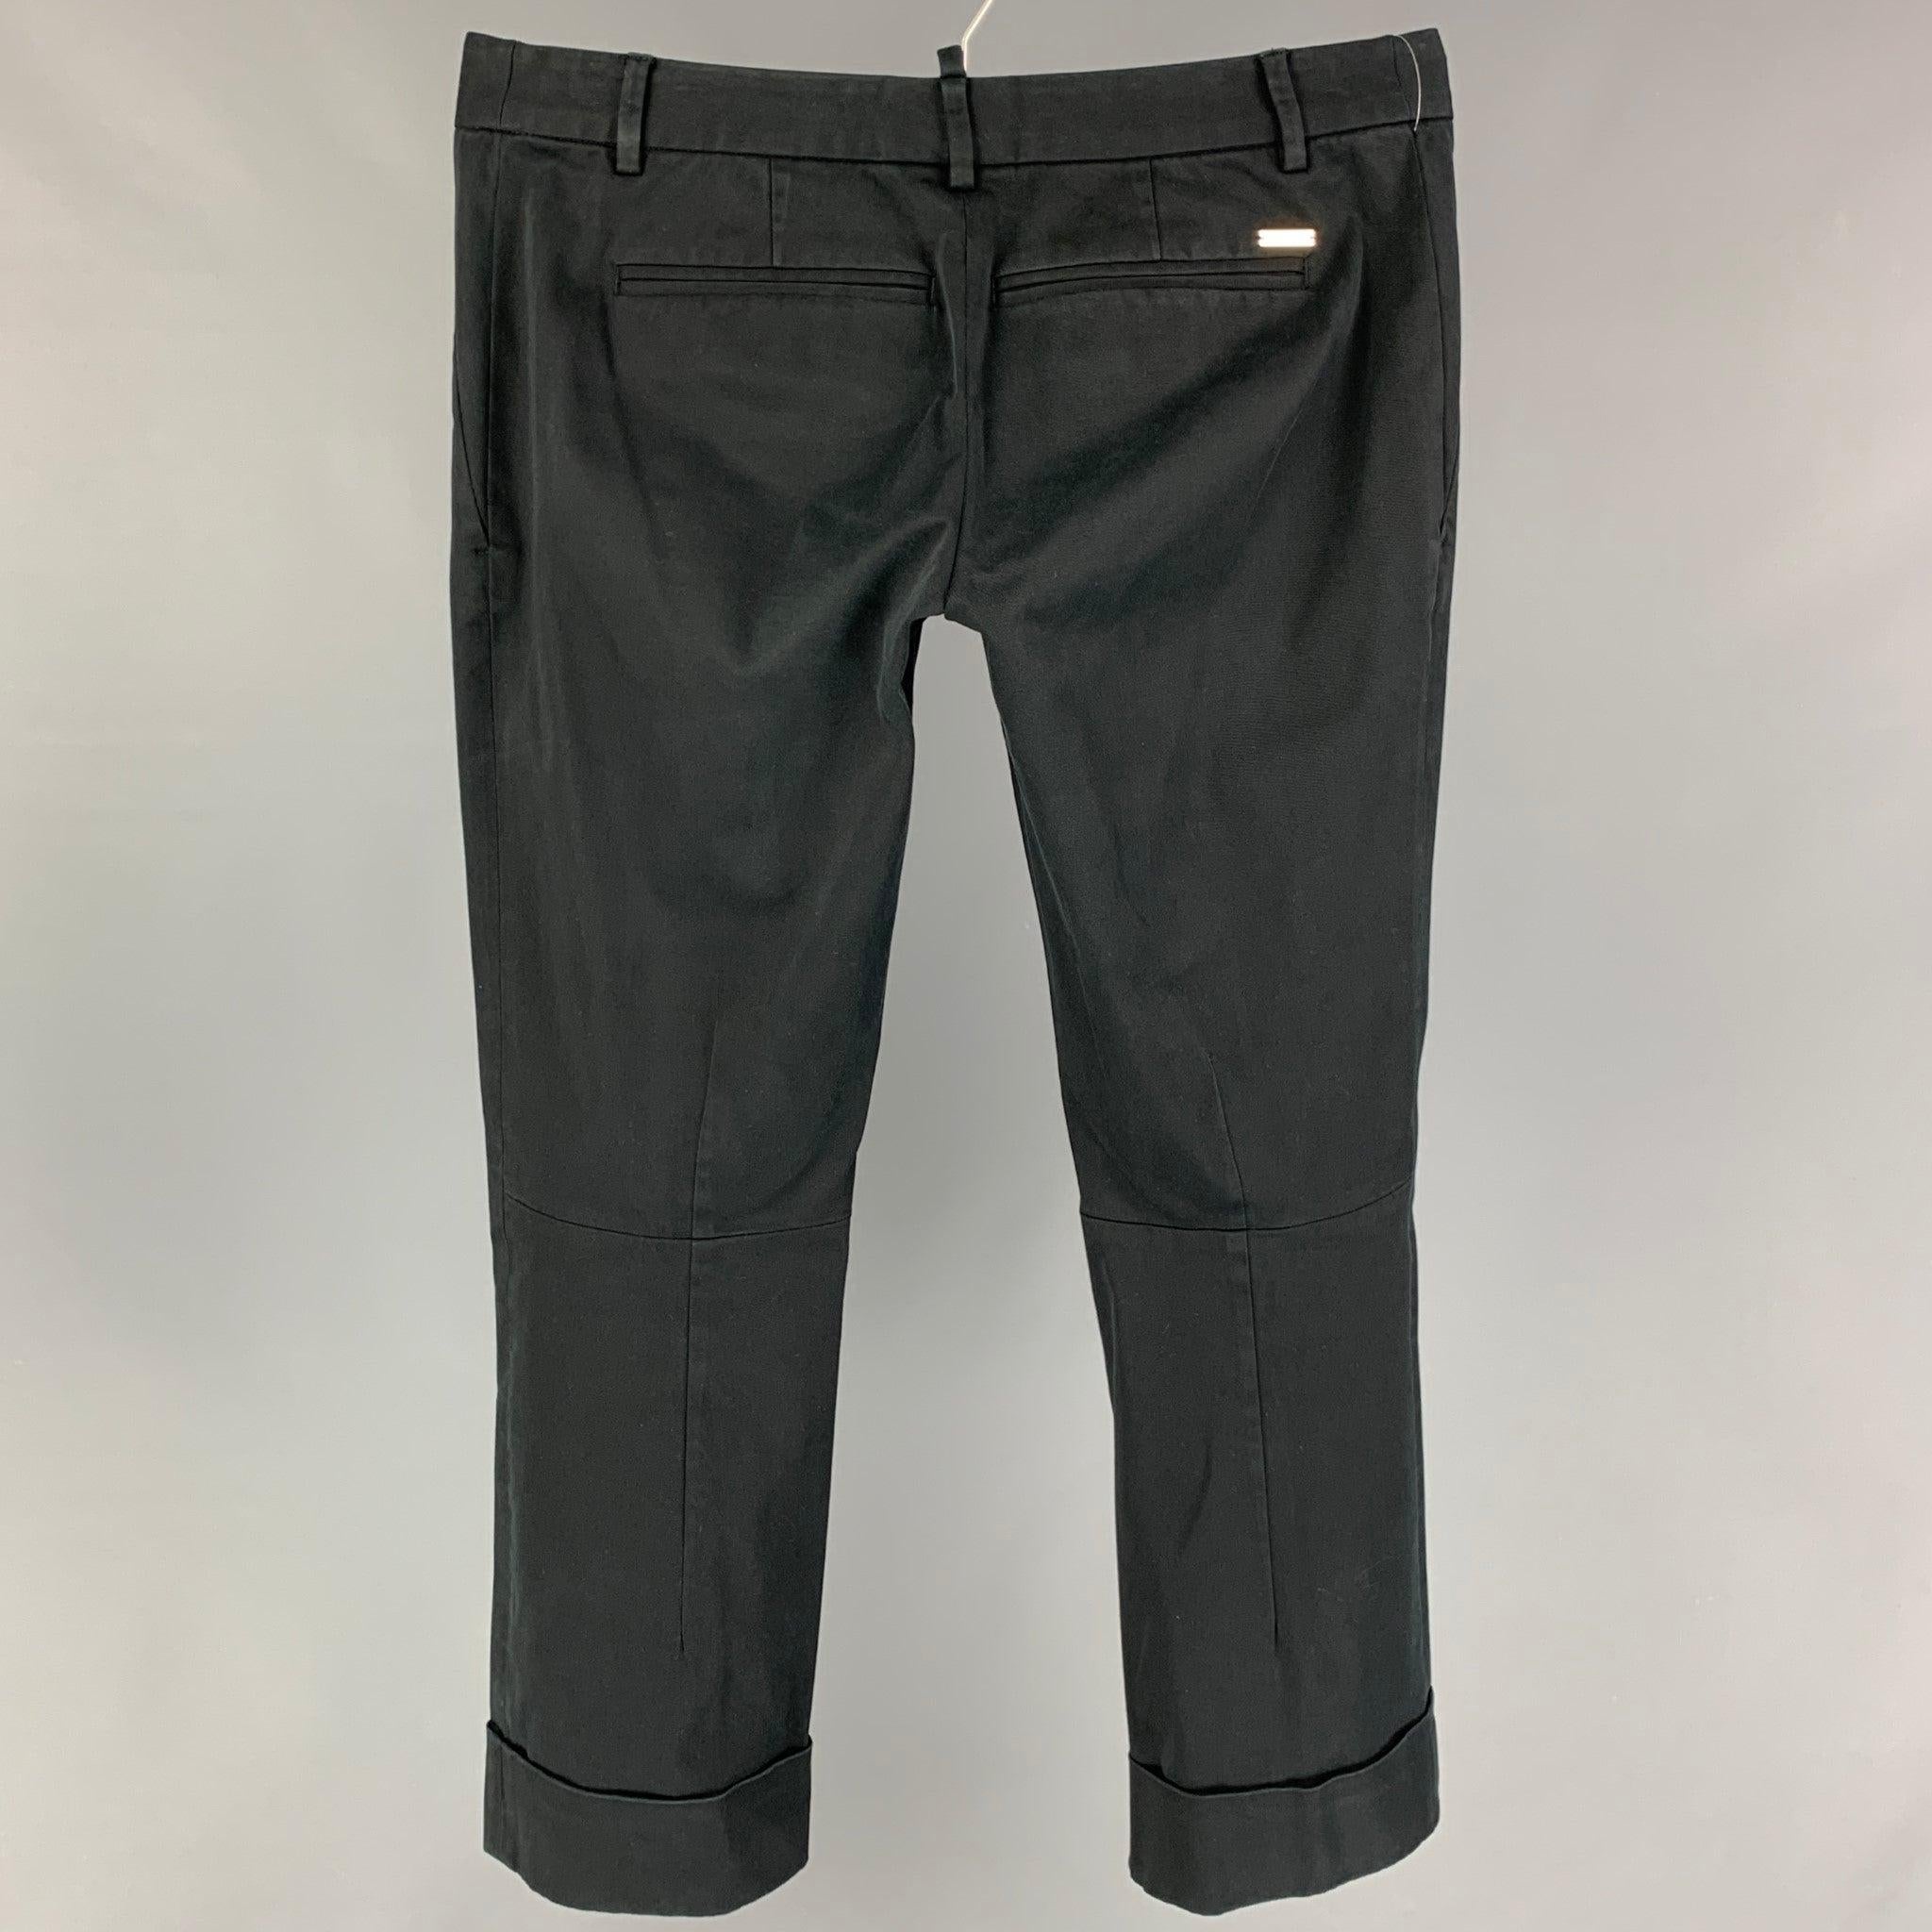 DSQUARED2 pants comes black cotton featuring a cropped style, front tab, and a buttoned fly. Made in Italy.
Very Good
Pre-Owned Condition. 

Marked:   44 

Measurements: 
  Waist: 32 inches  Rise: 7 inches  Inseam: 27 inches 
  
  
 
Reference: